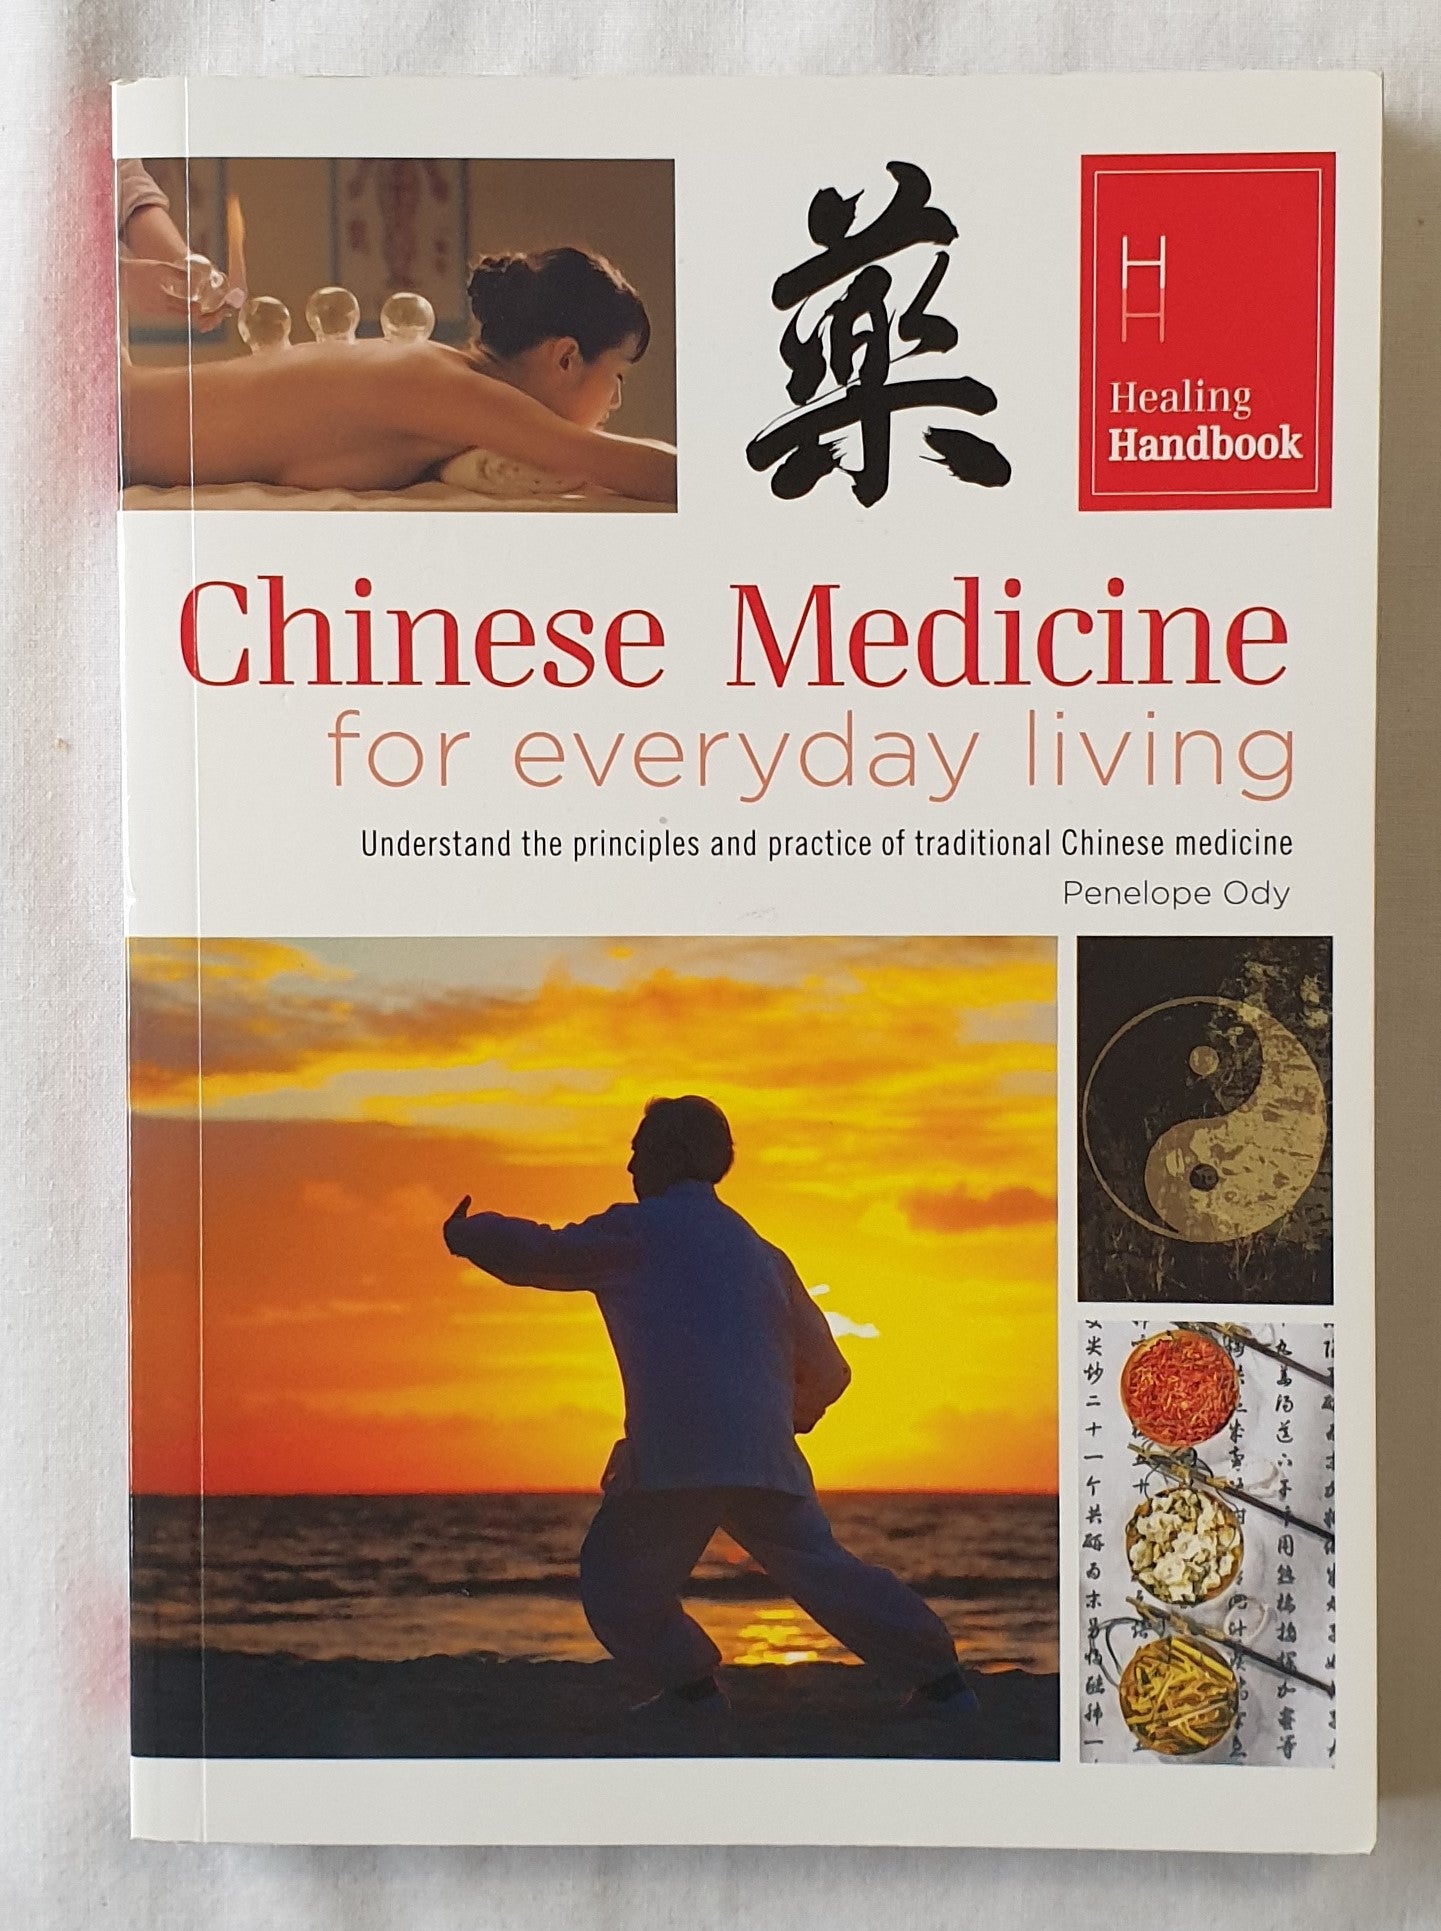 Chinese Medicine  for everyday living  by Penelope Ody